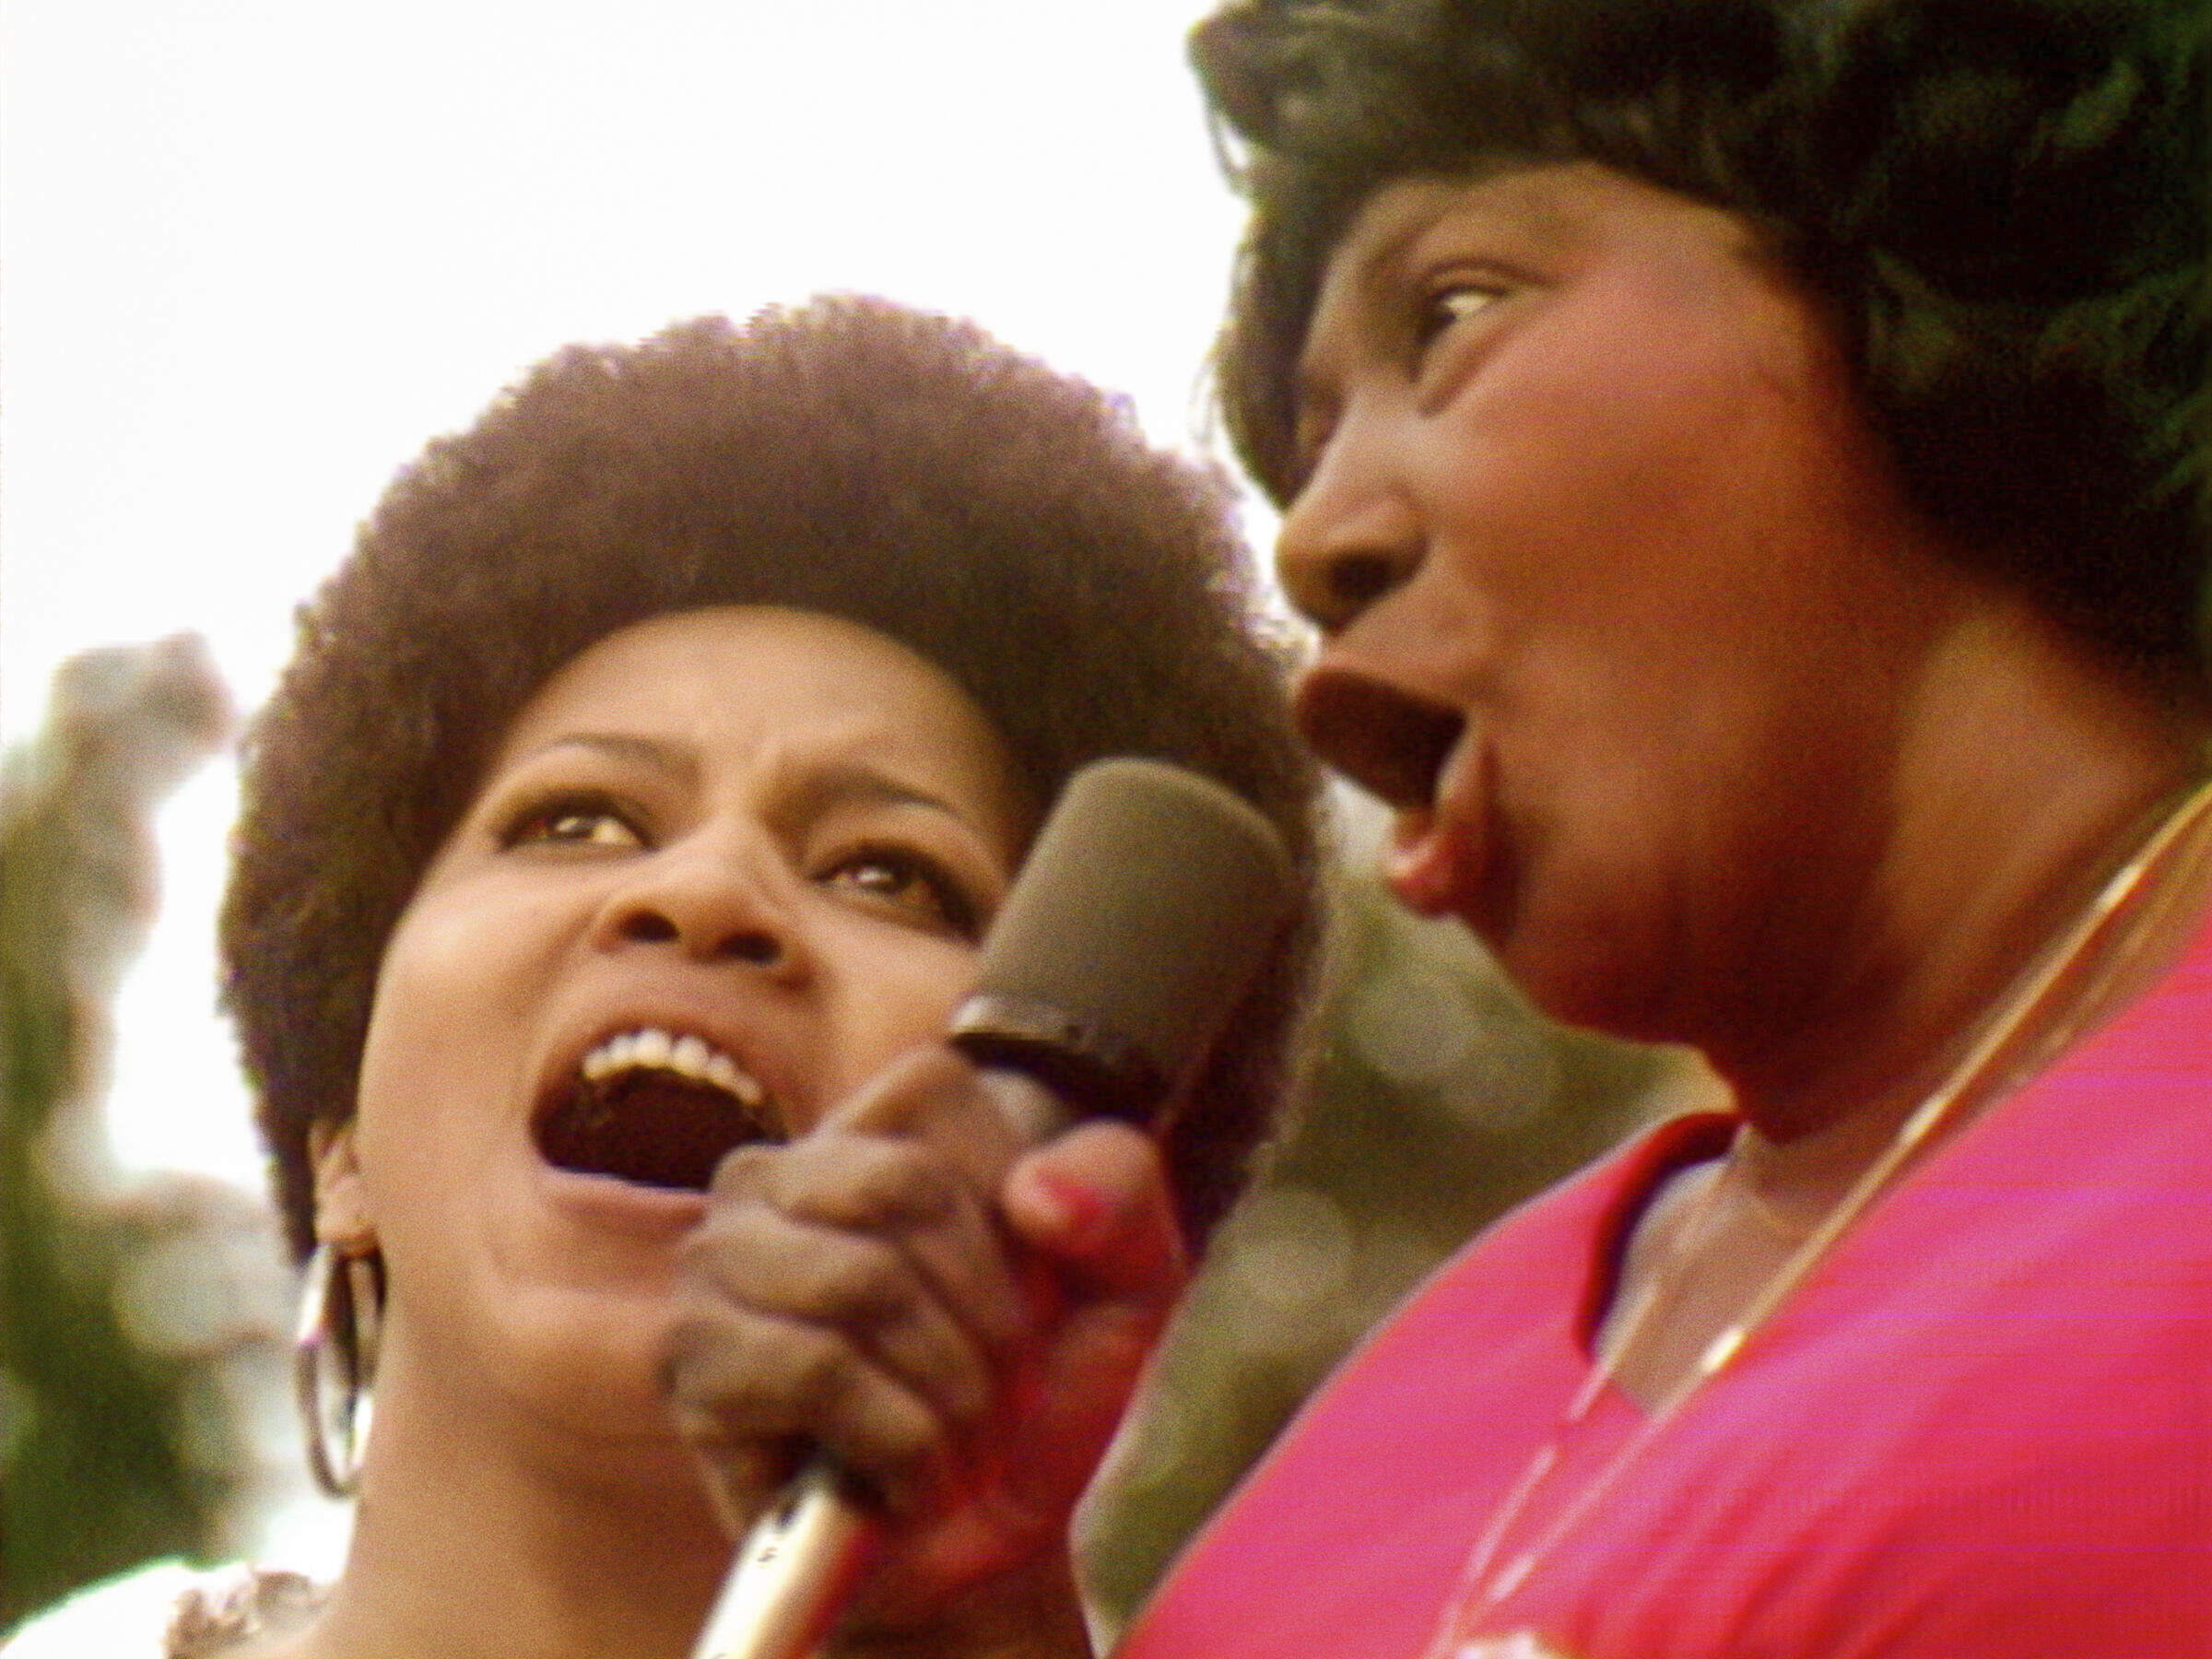 Mavis Staples, left, and Mahalia Jackson performing at the Harlem Cultural Festival in 1969, in a scene from the documentary "The summer of the soul."